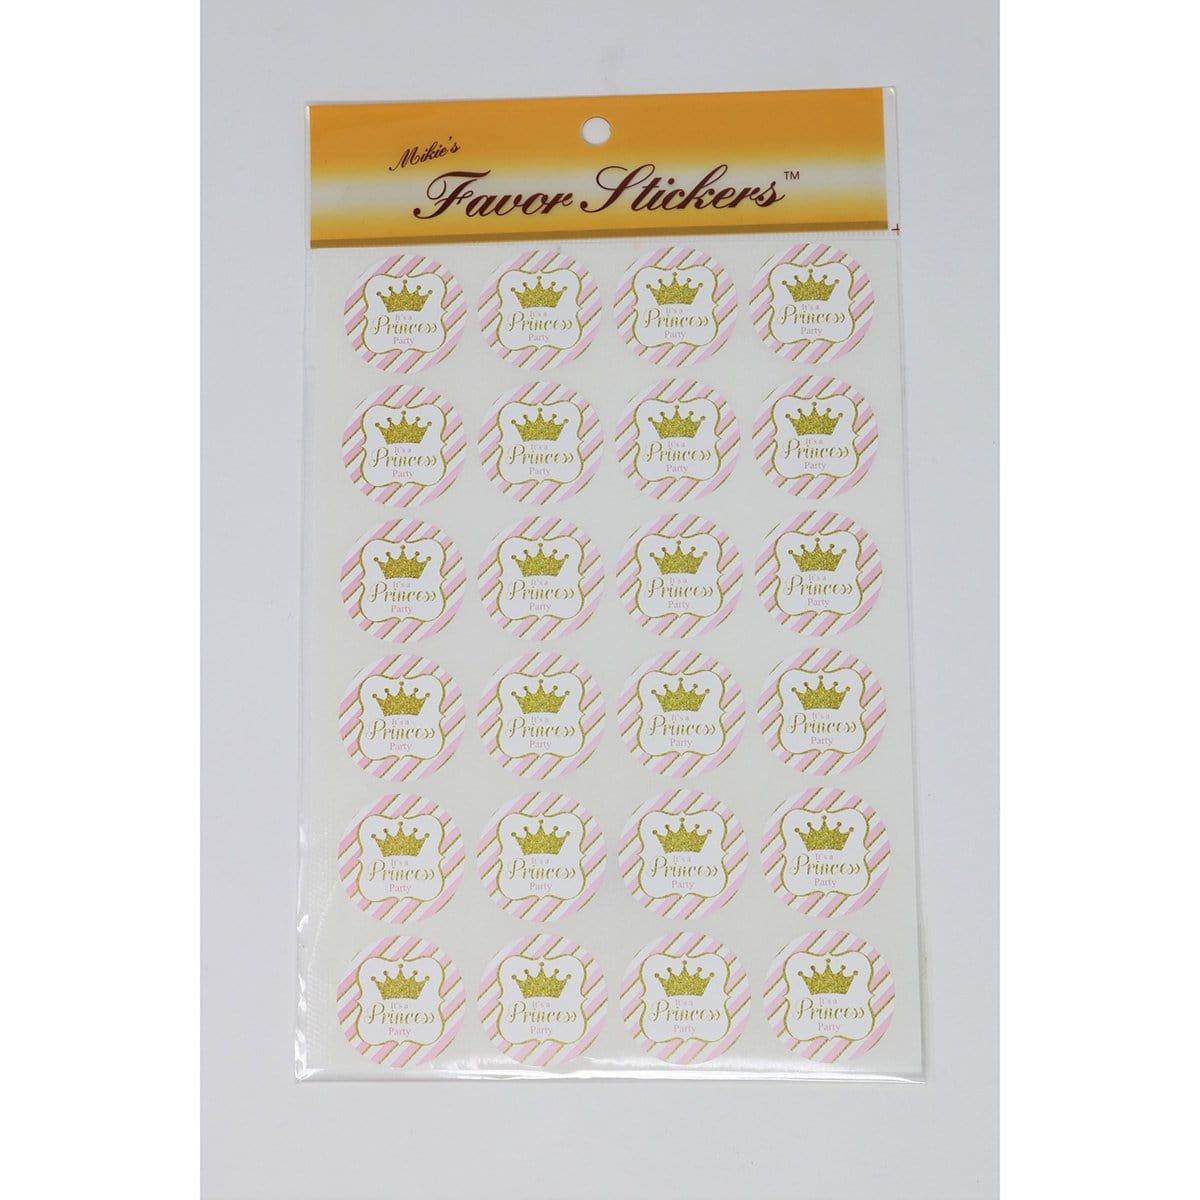 Buy Baby Shower Princess party stickers, 24 per package sold at Party Expert